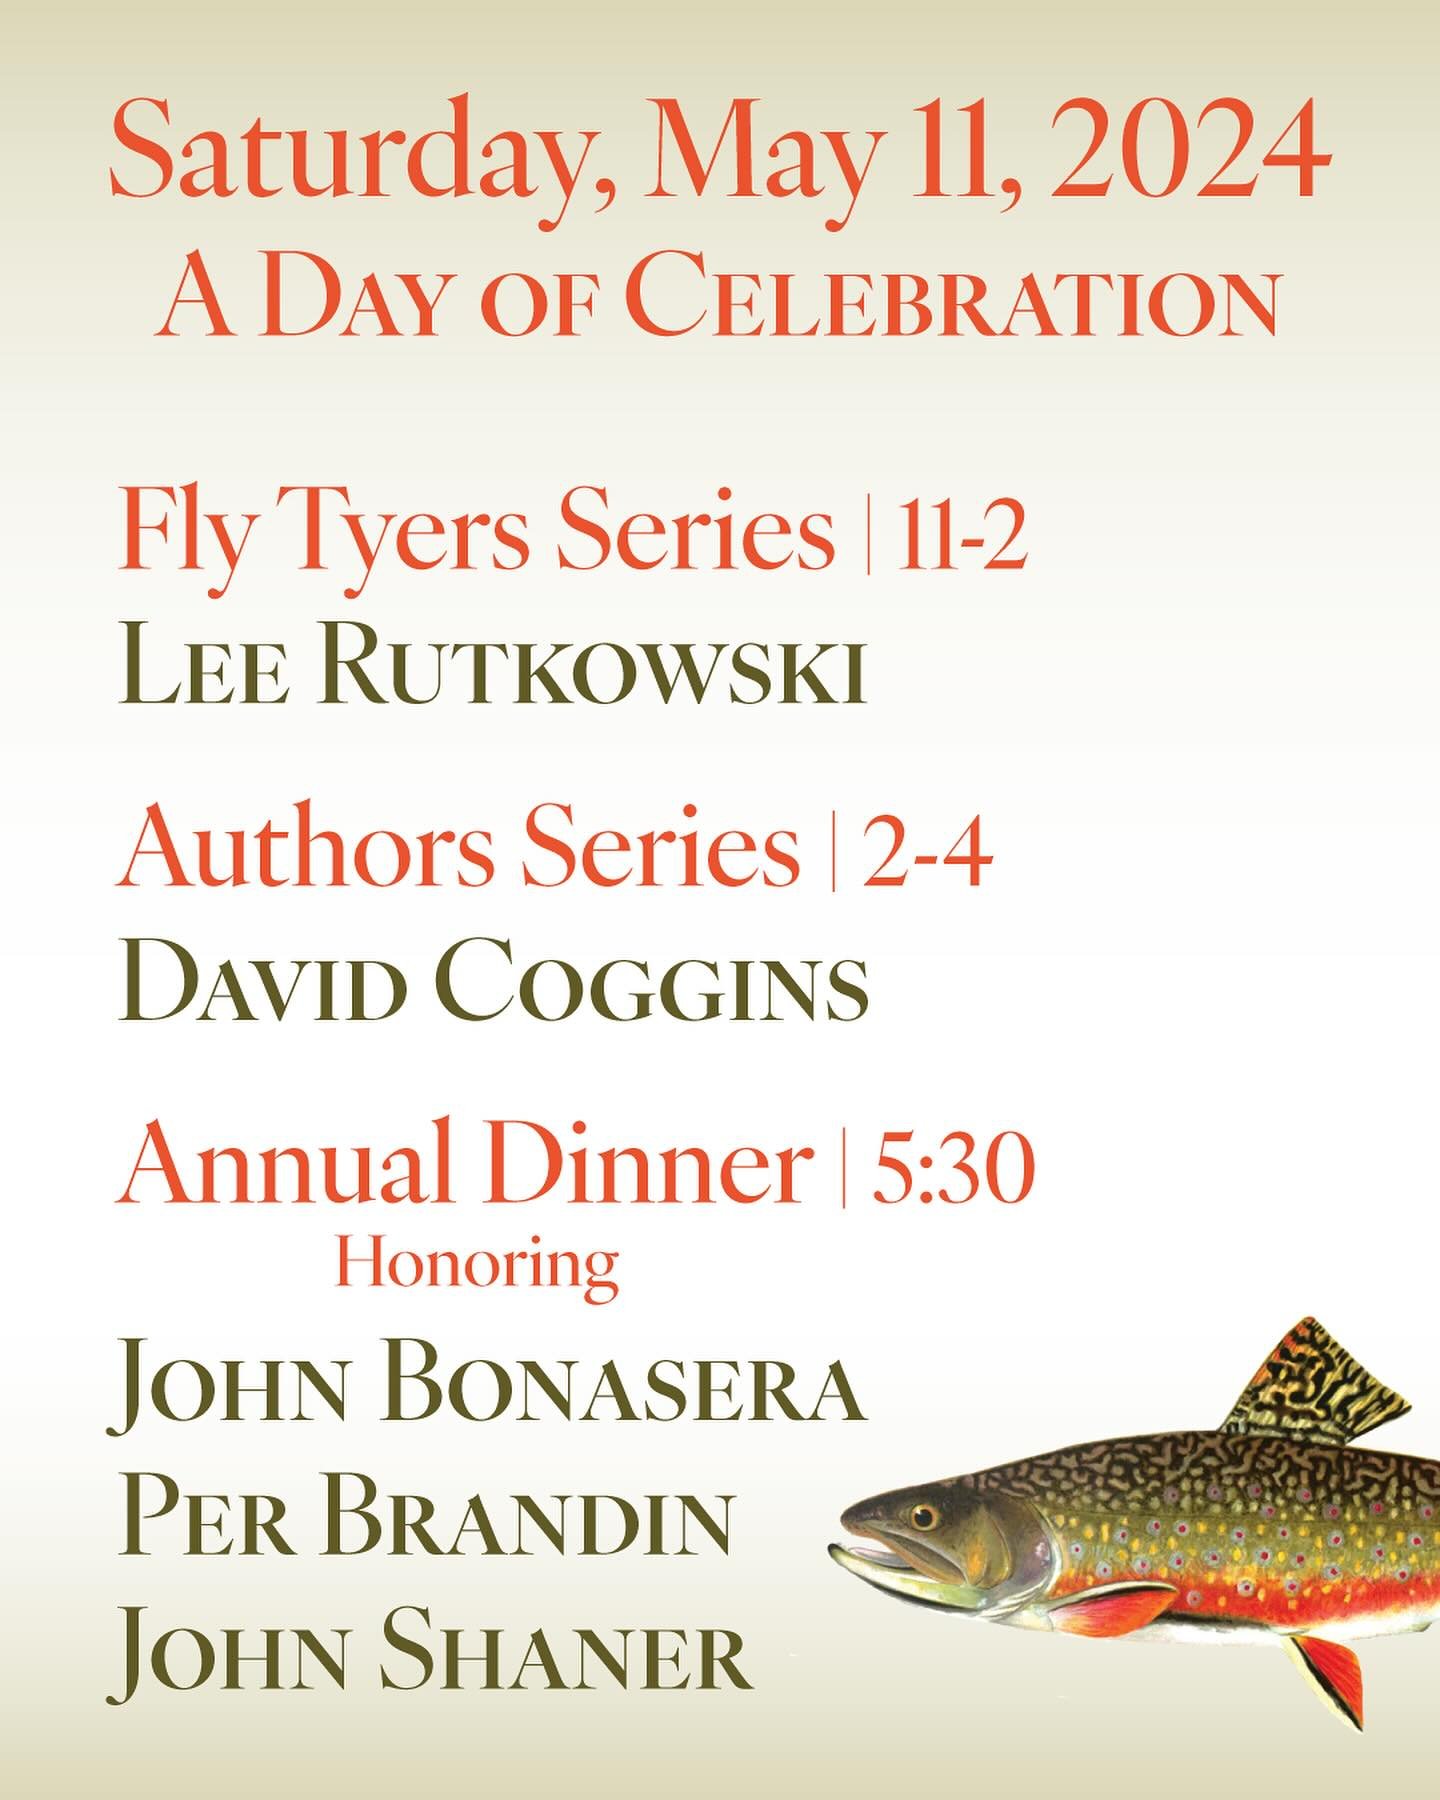 Please spend the day with us, this Saturday, as we celebrate our collective love of fly fishing with help from some special guests ahead of our Annual Dinner. 

First up from 11-2 in the museum, local tyer Lee Rutkowski will be at the vice as a guest